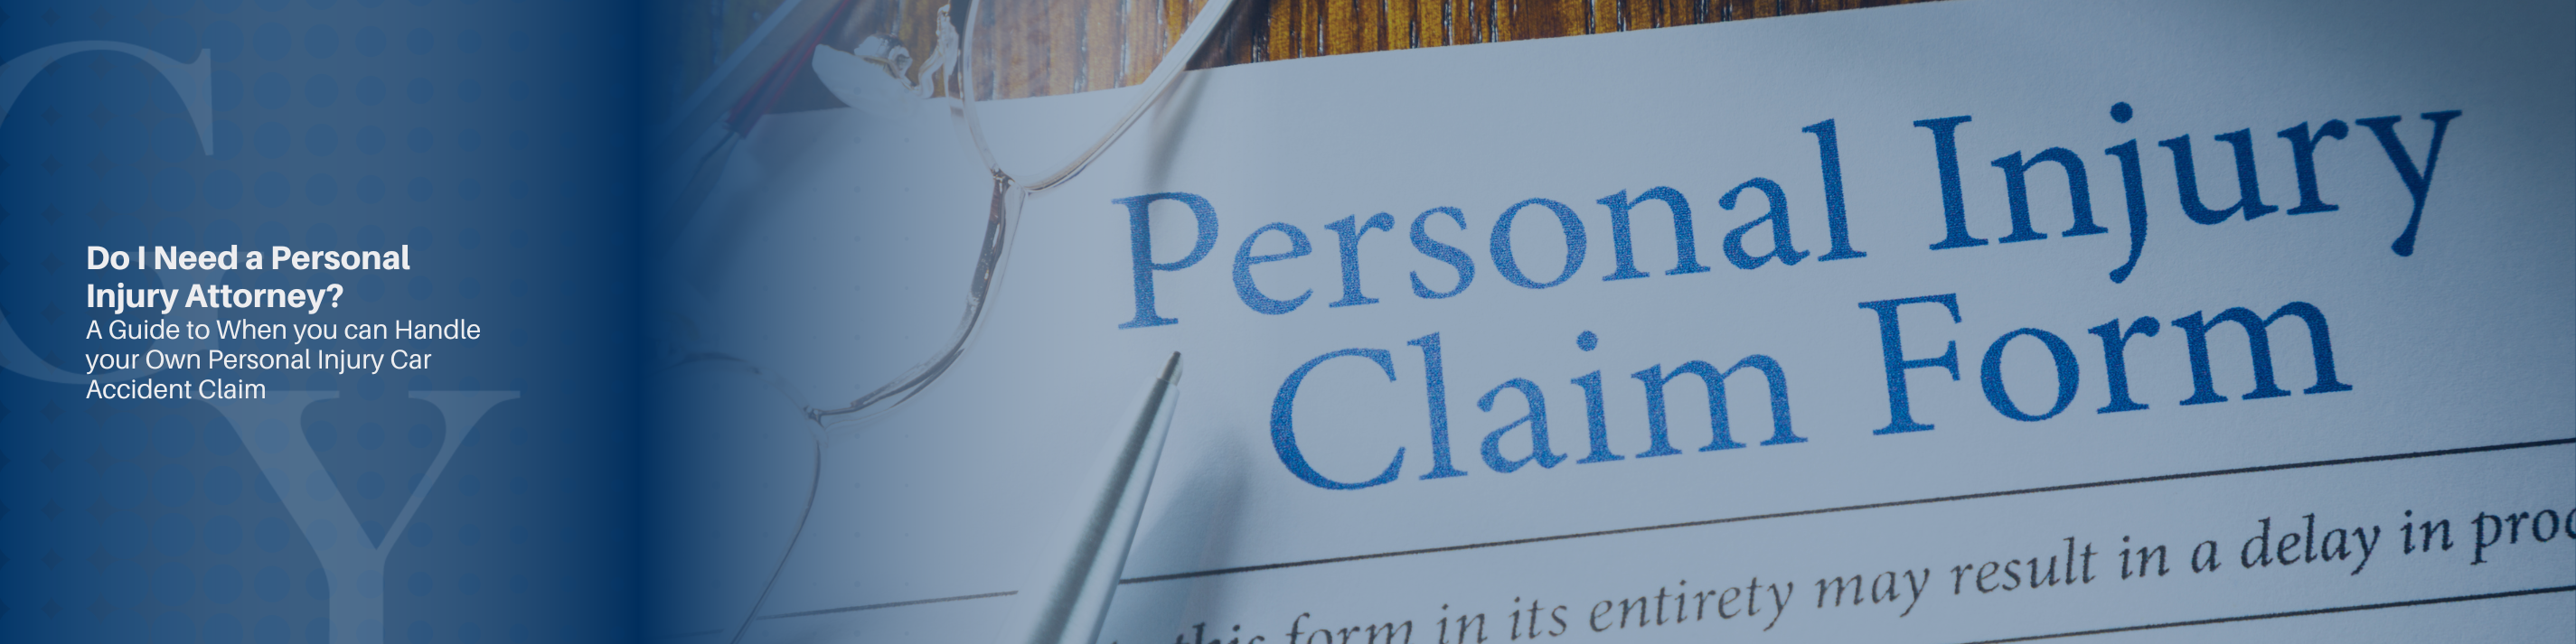 papers that say personal injury claim form, with the blog post next to it saying "Do I Need a Personal Injury Attorney? A Guide to When you can Handle your Own Personal Injury Car Accident Claim "